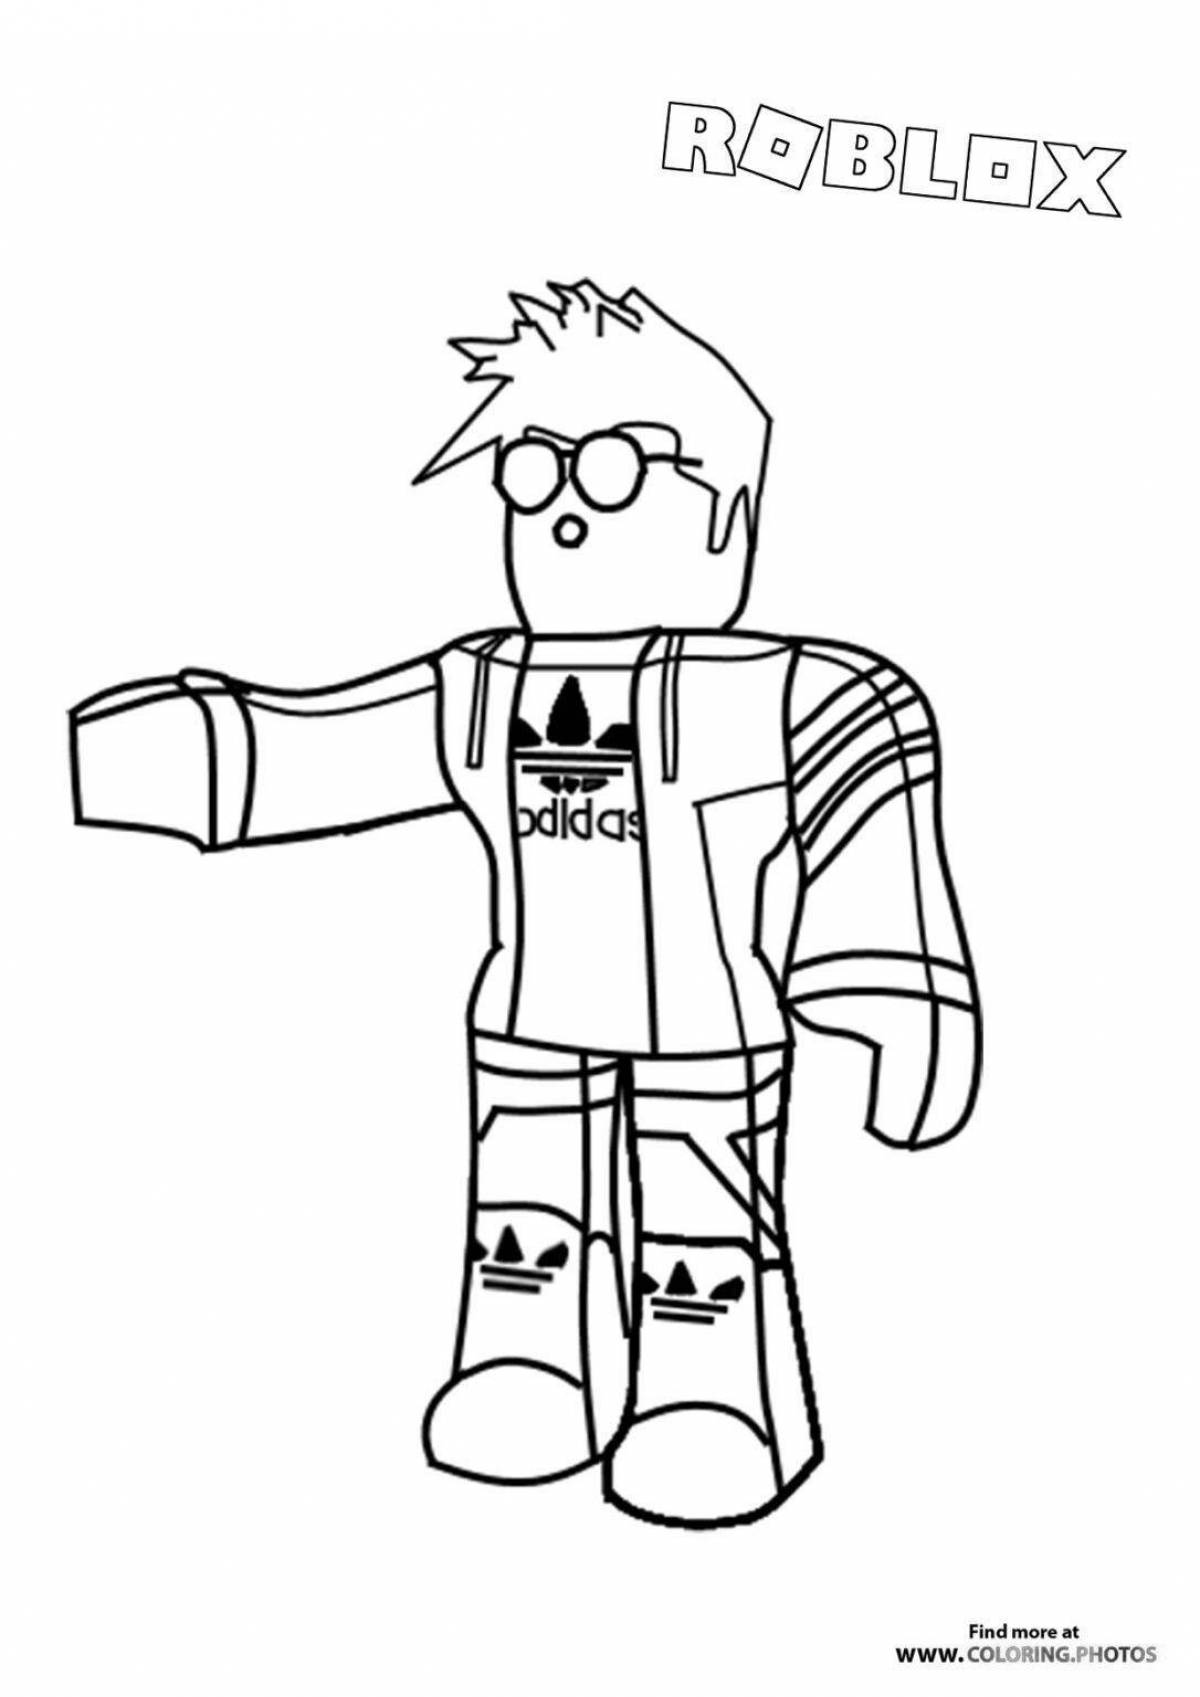 Color-crazy roblox coloring page for boys 10 years old